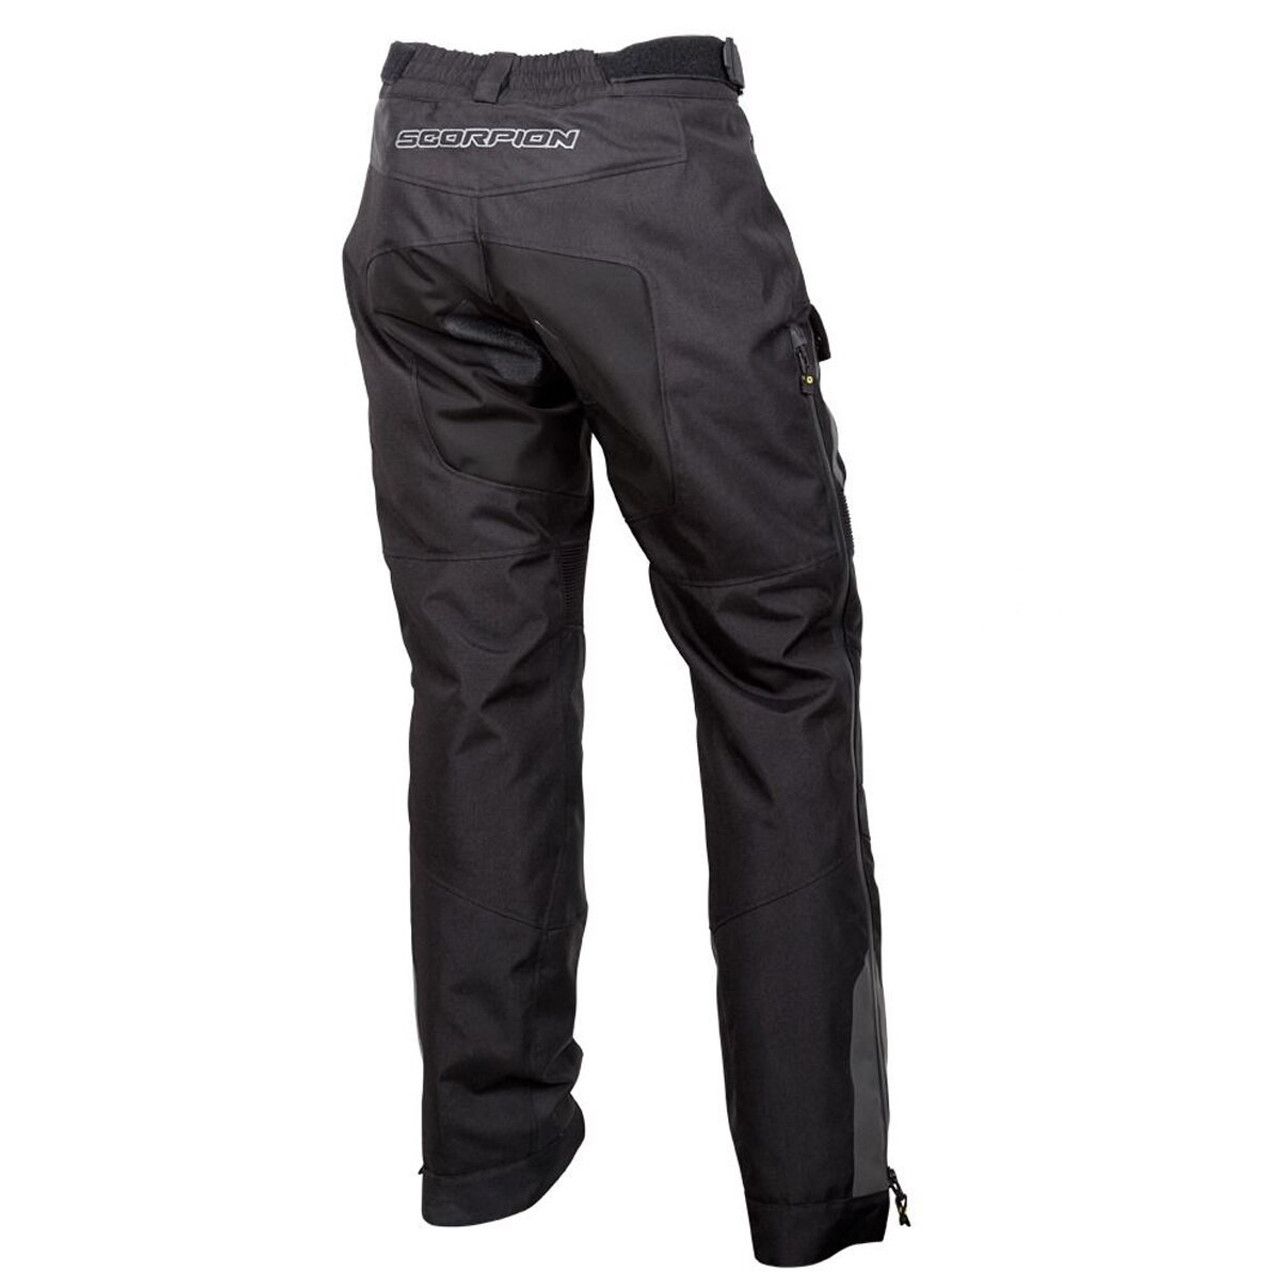 Waterproof Over-Trousers | Cavaletti Clothing